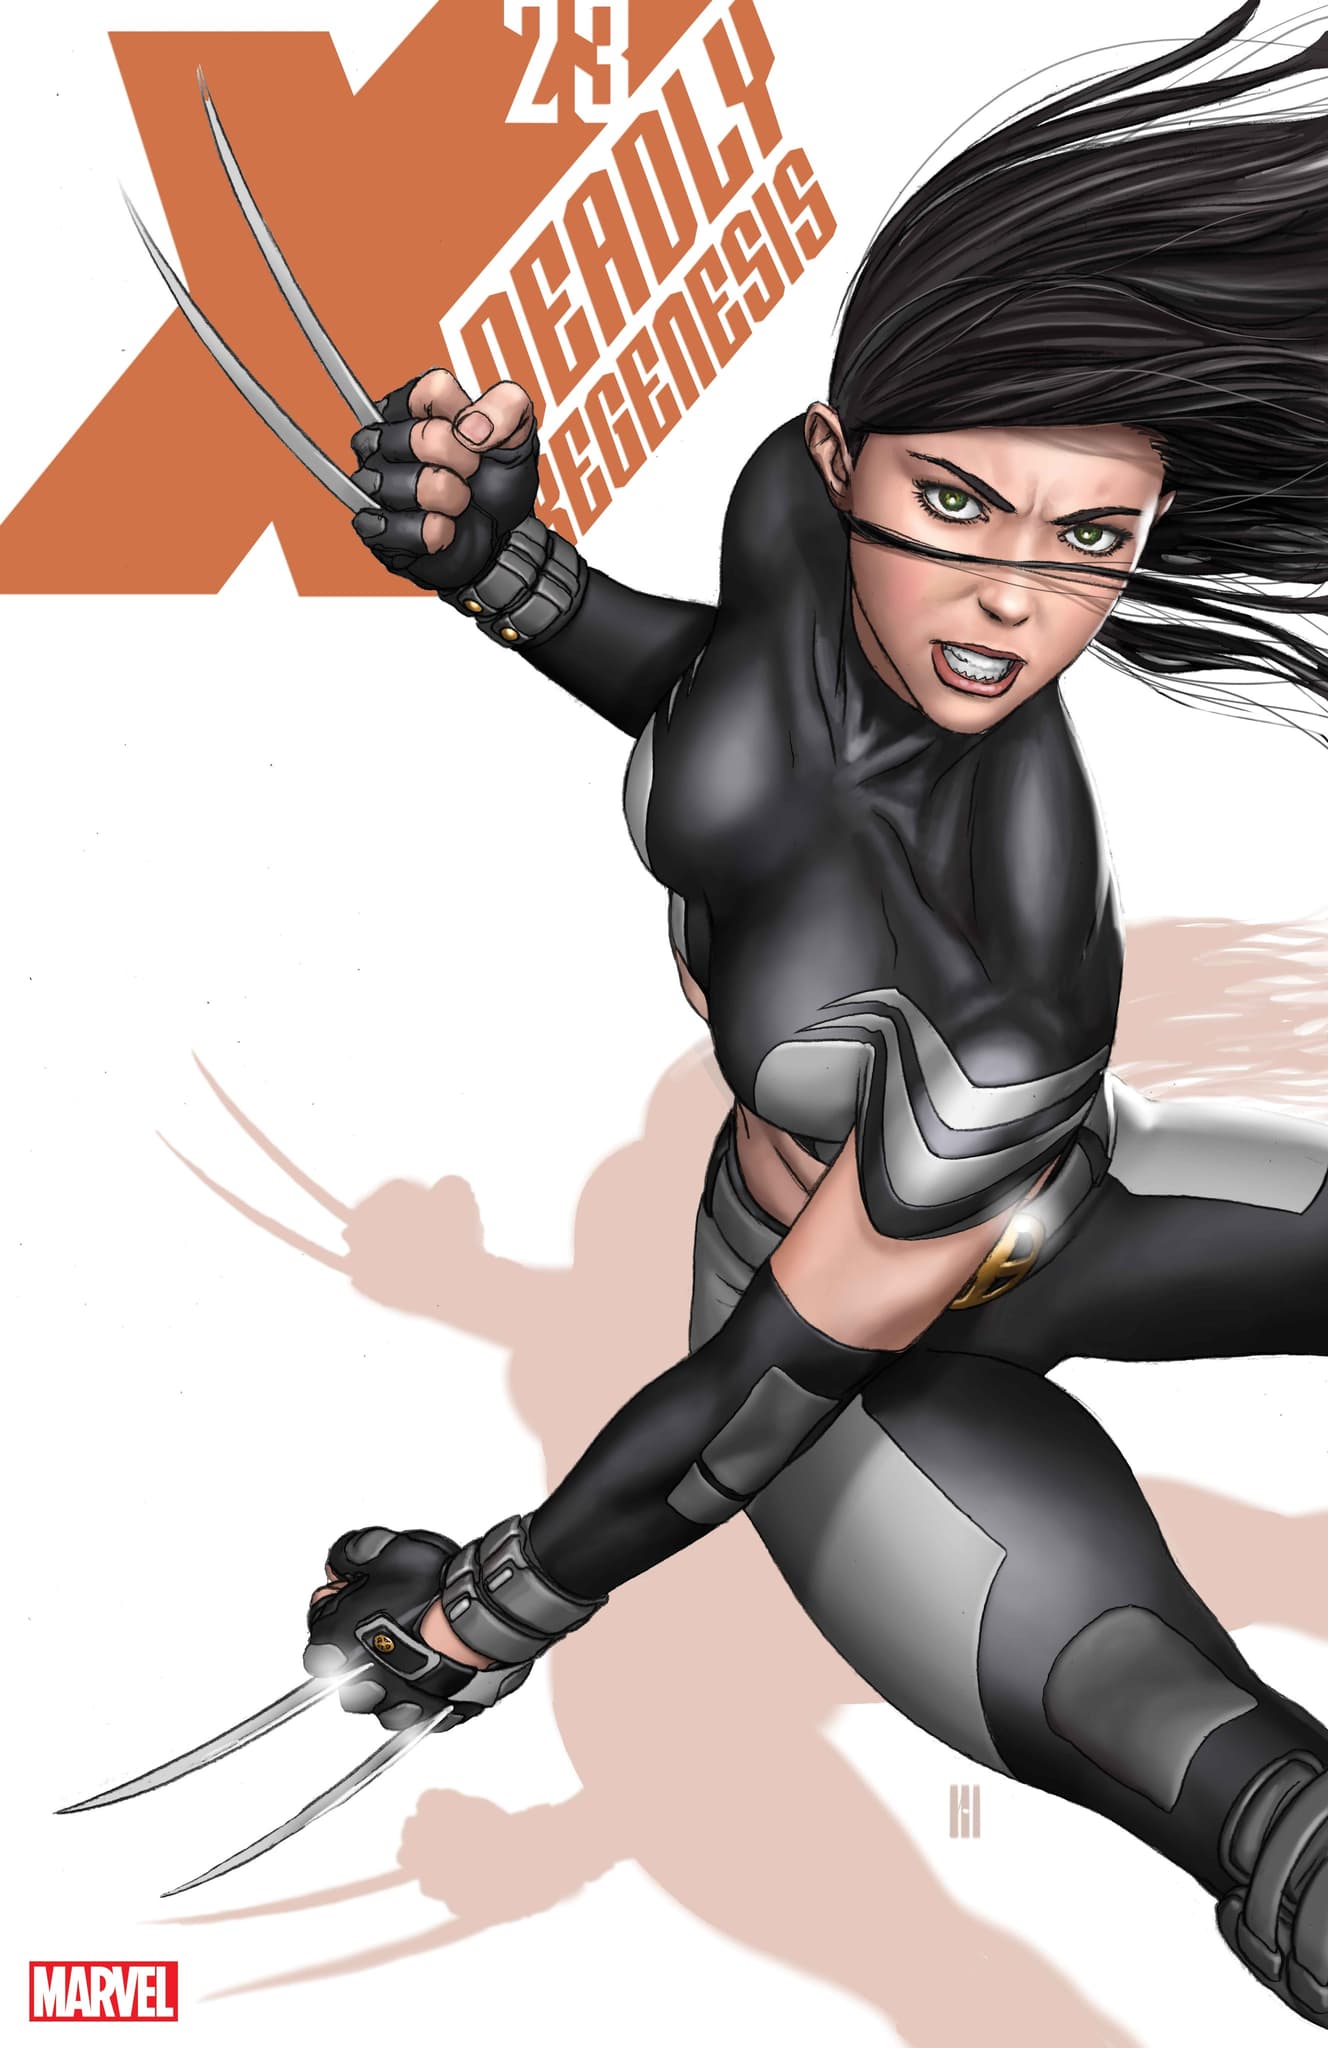 X-23: DEADLY REGENESIS #1 cover by Mike Choi